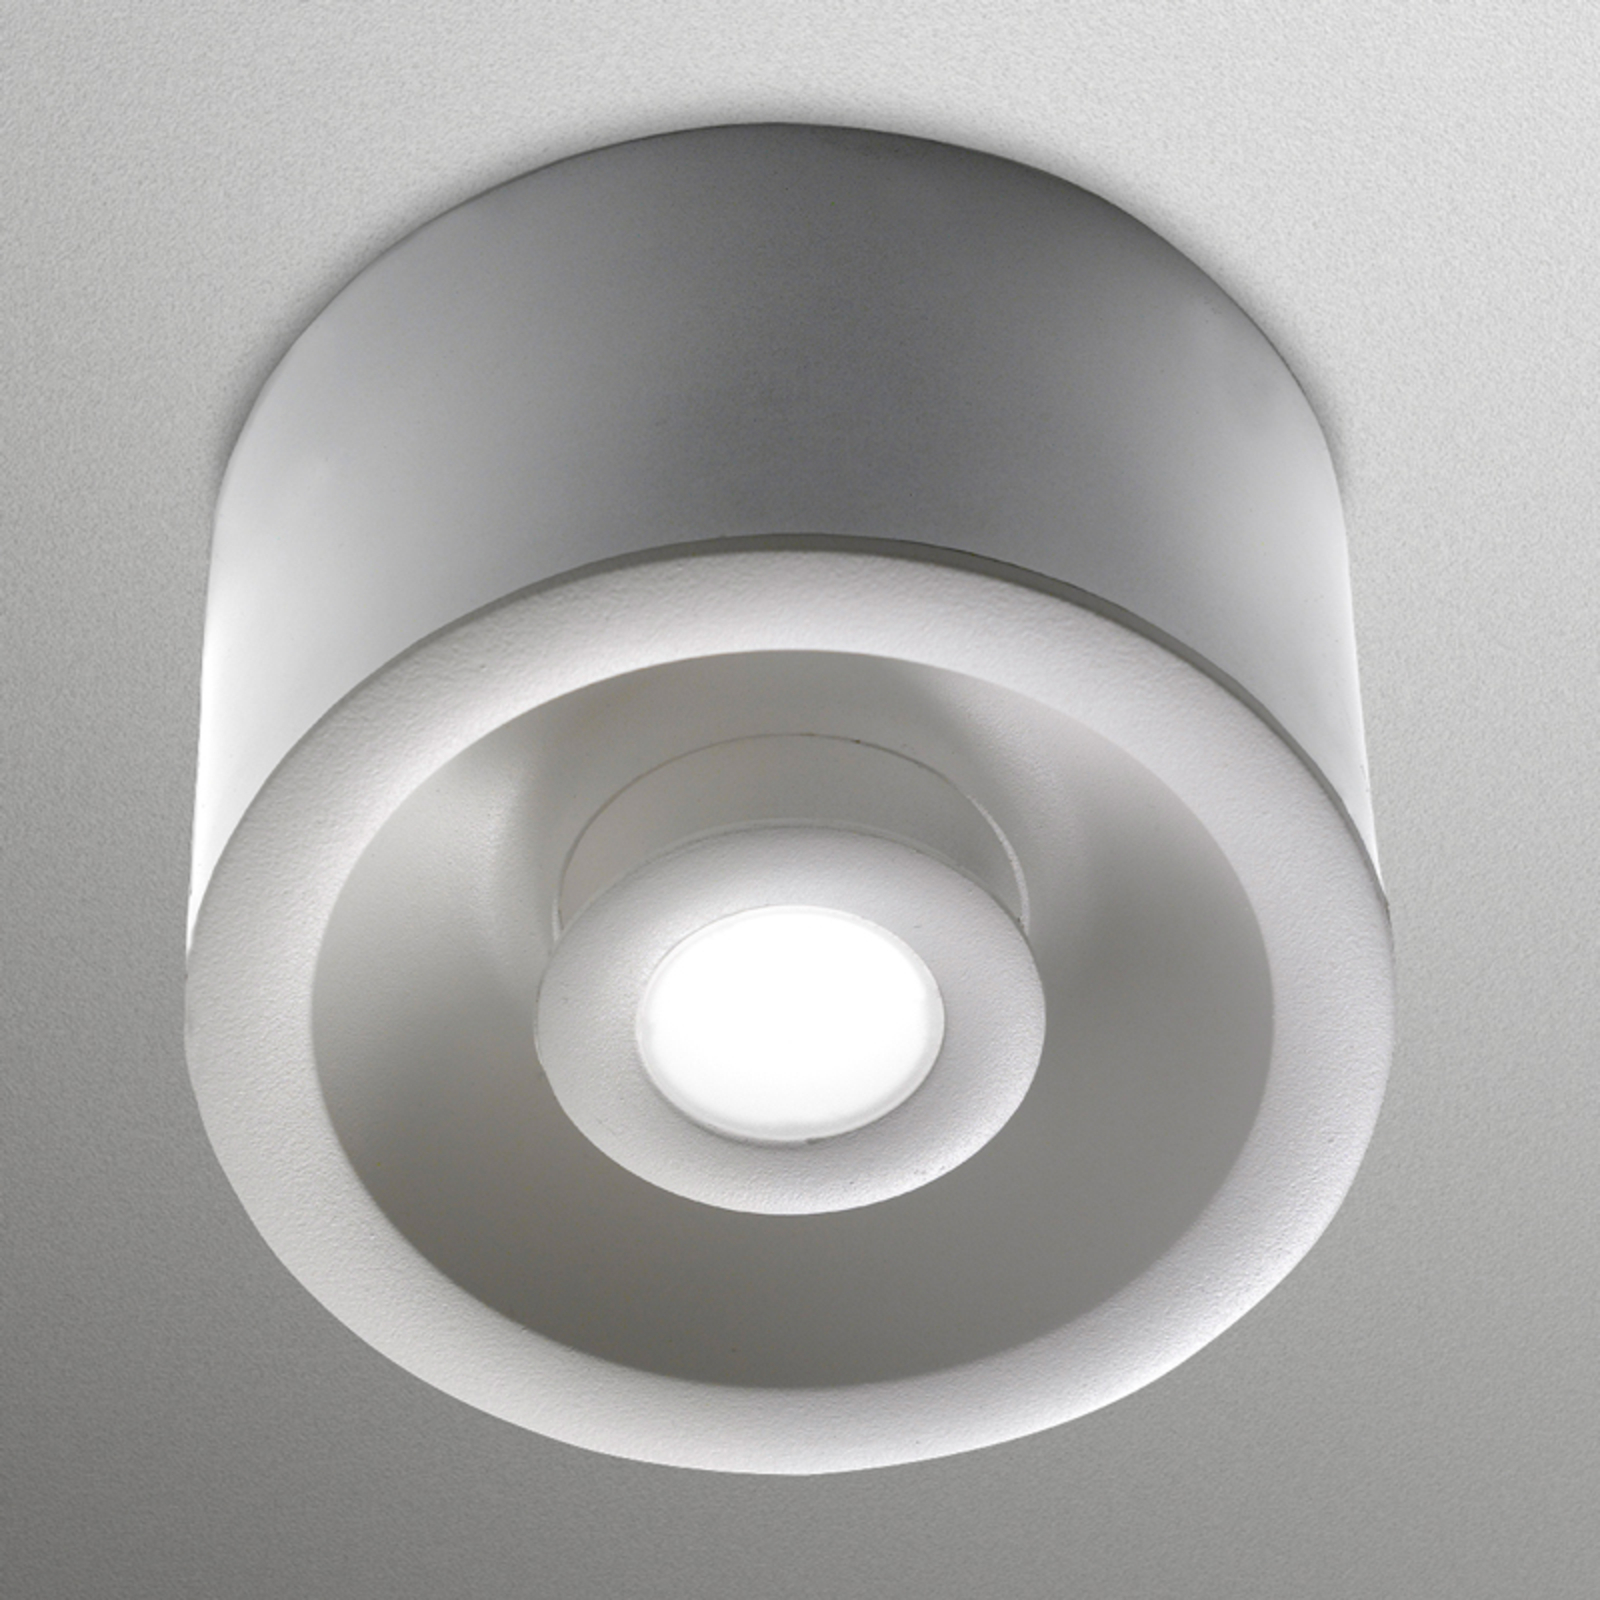 LED ceiling light Eclipse with innovative technology